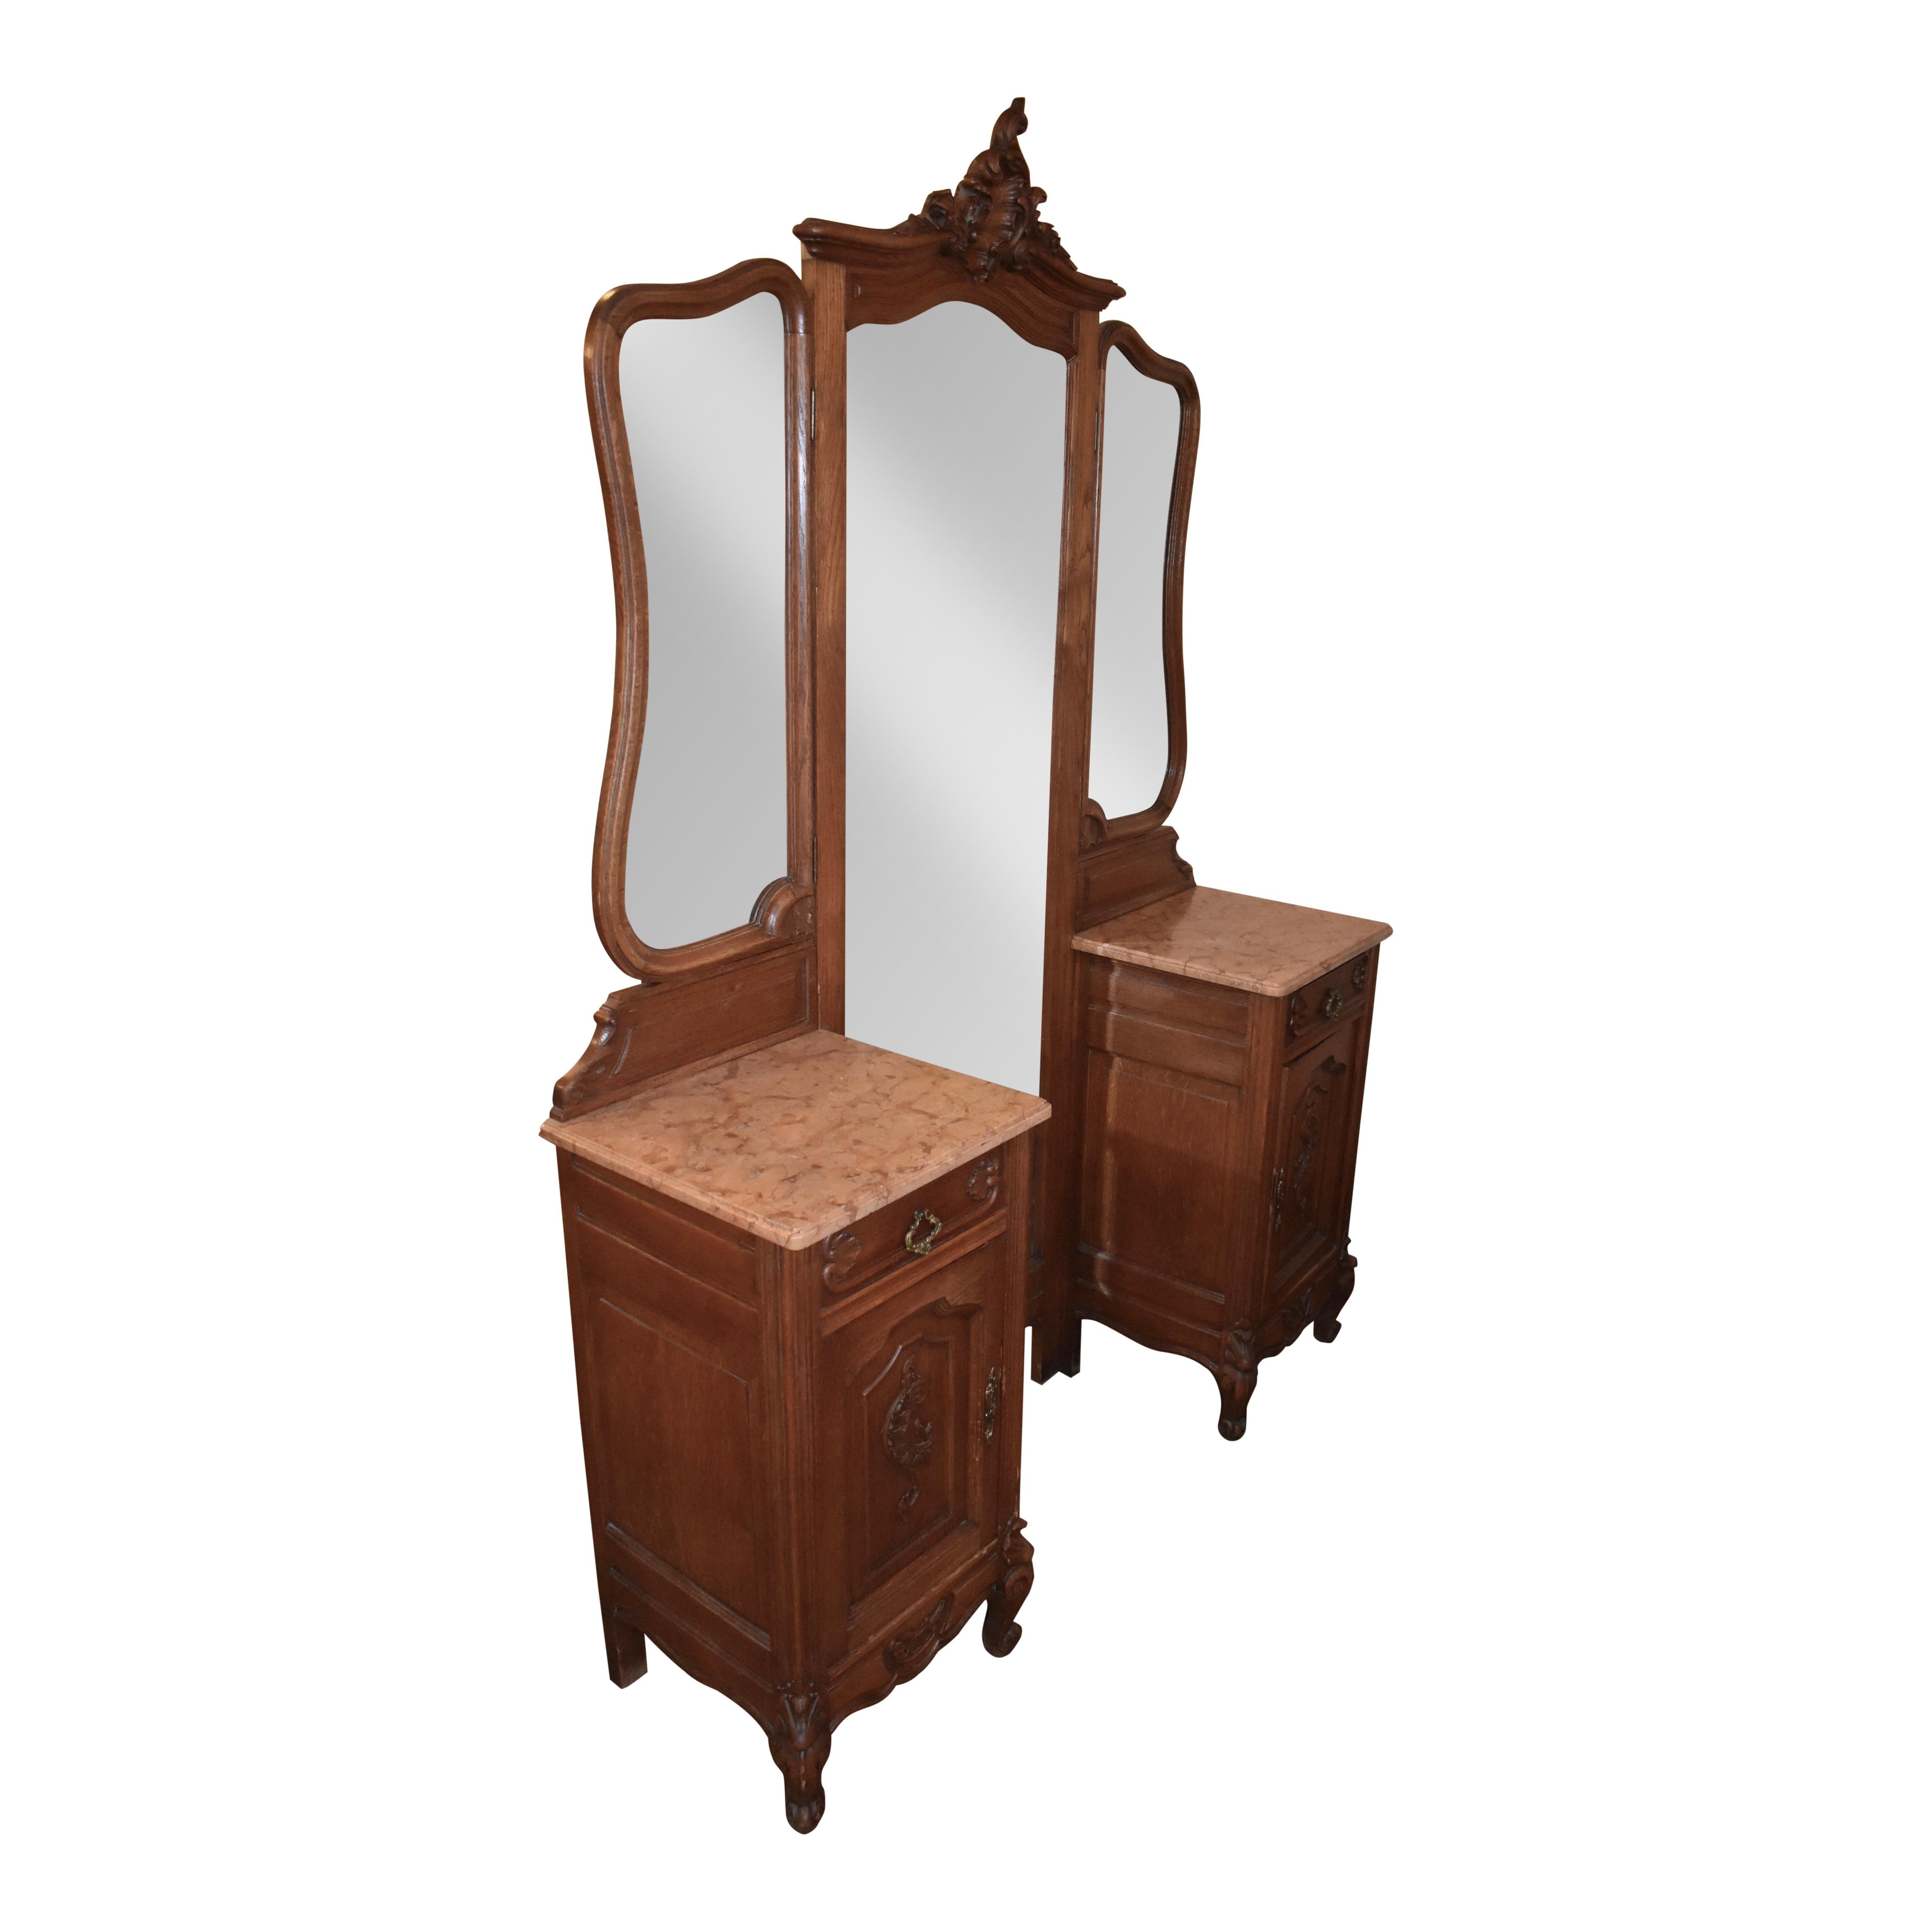 Get ready to start your day or night out at this stunning, oak dressing table. Crafted in the late-19th century, it has so much to brag about. Its full length mirror and hinged, tri-fold side mirrors make it possible to see your reflection from so